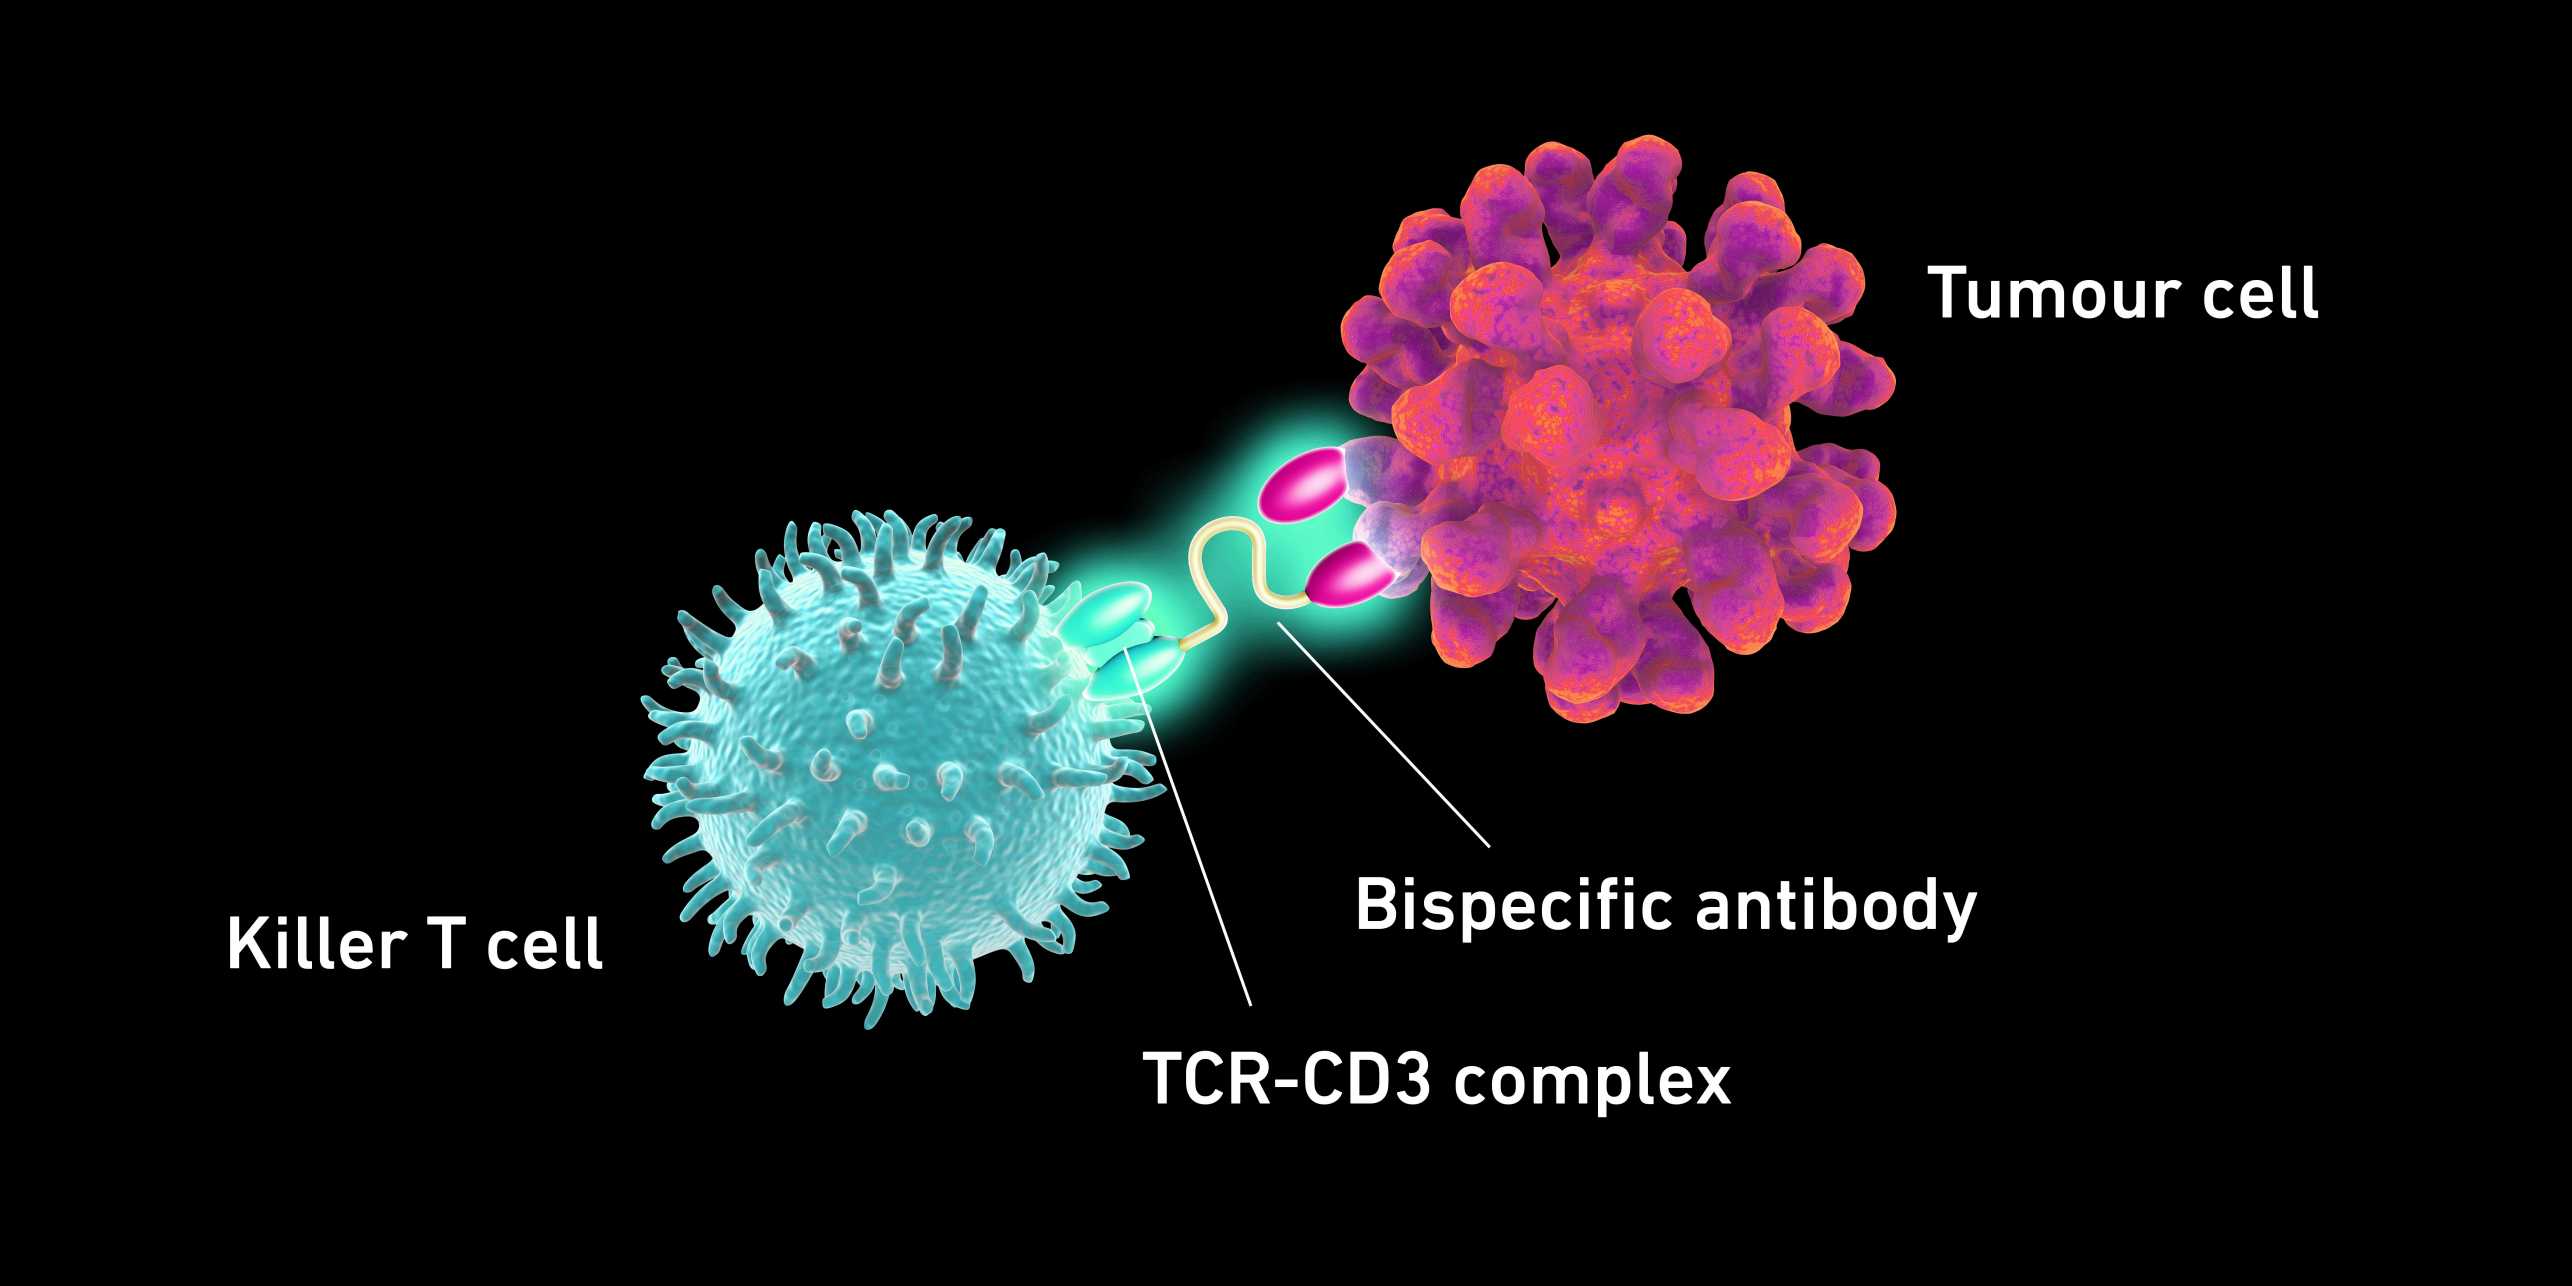 Enlarged view: Illustration showing the relationship between the Killer T cell and the Tumour cell.